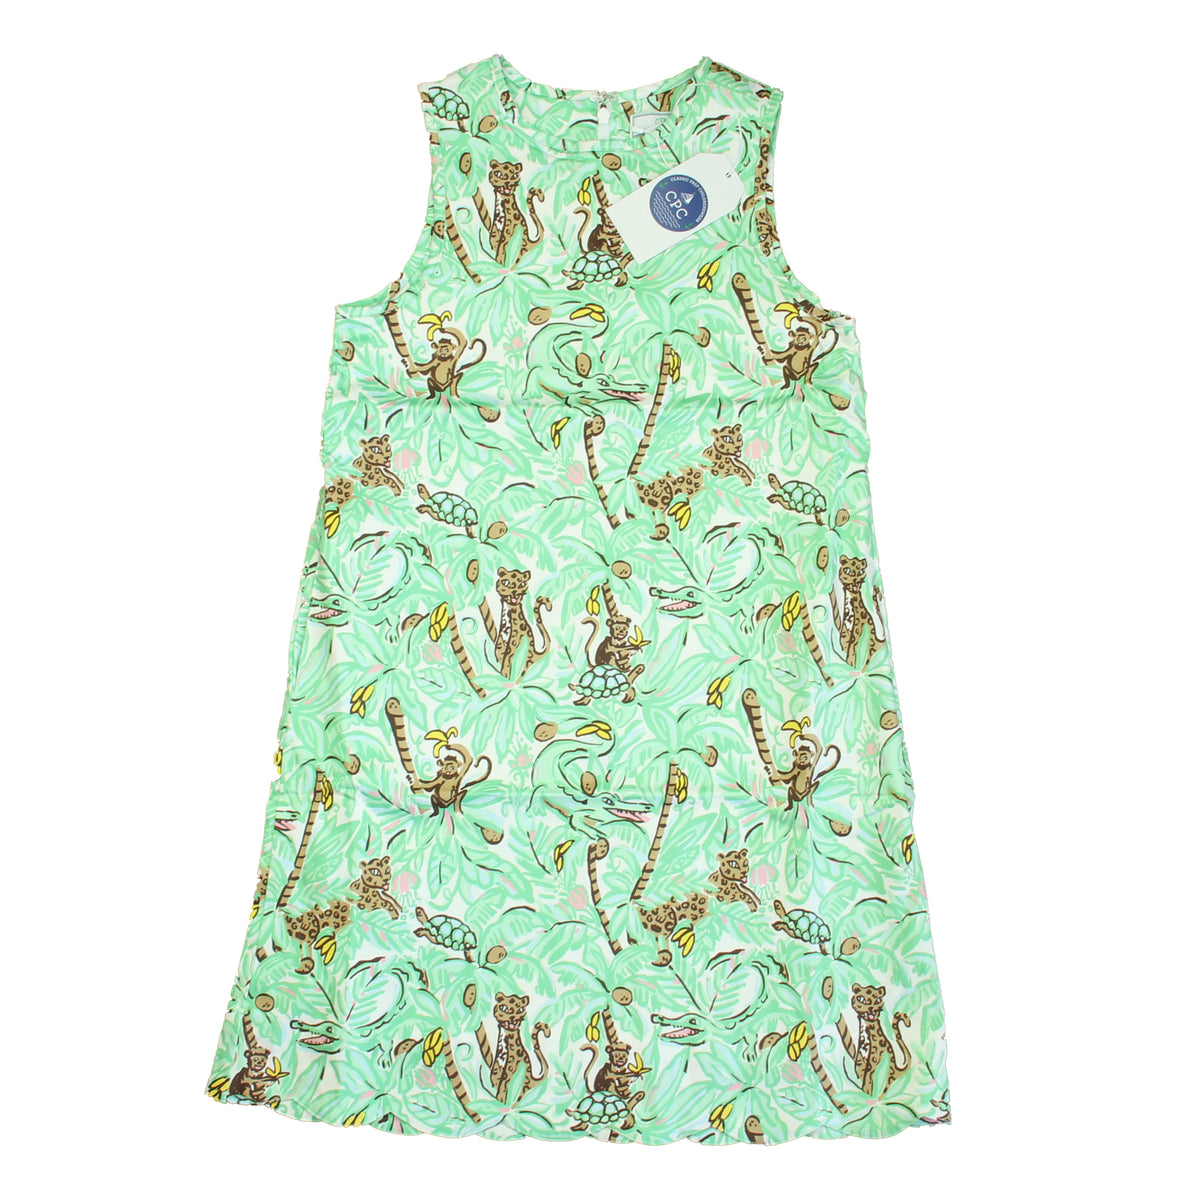 New with Tags: Jaguar Jungle Dress size: 6-14 Years -- FINAL SALE